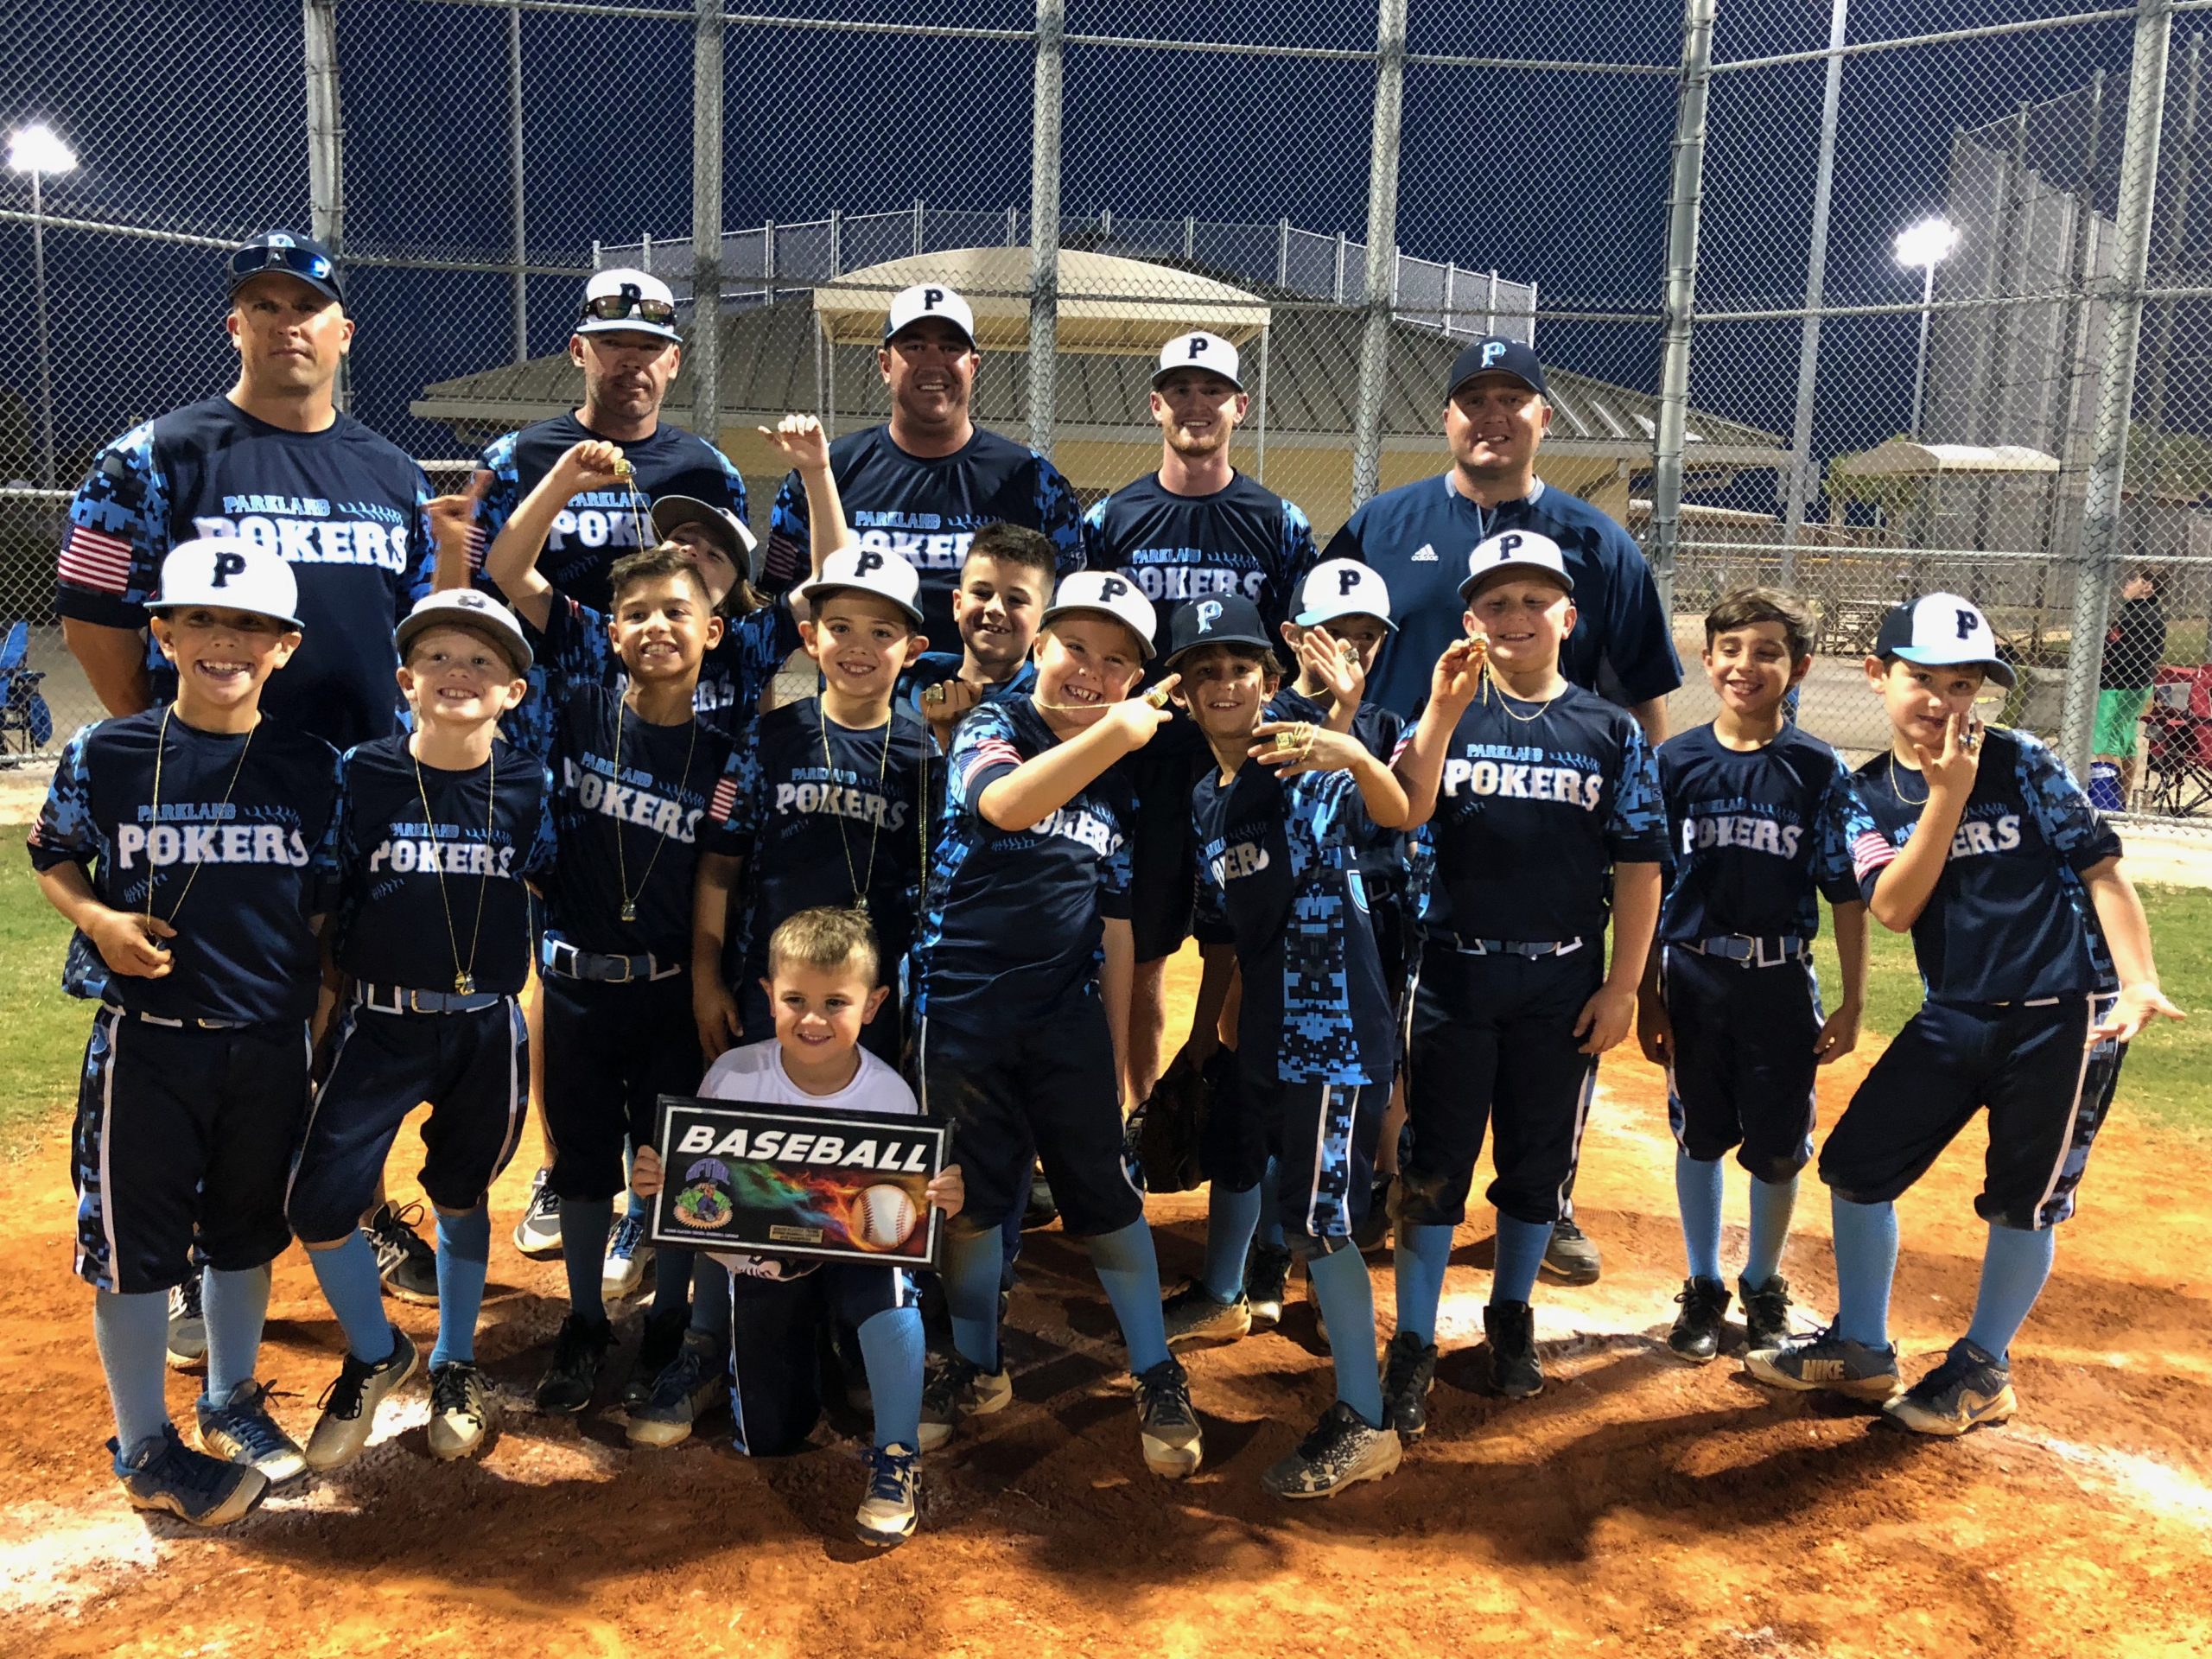 Florida Pokers Hold Tryouts for 8U Team July 15